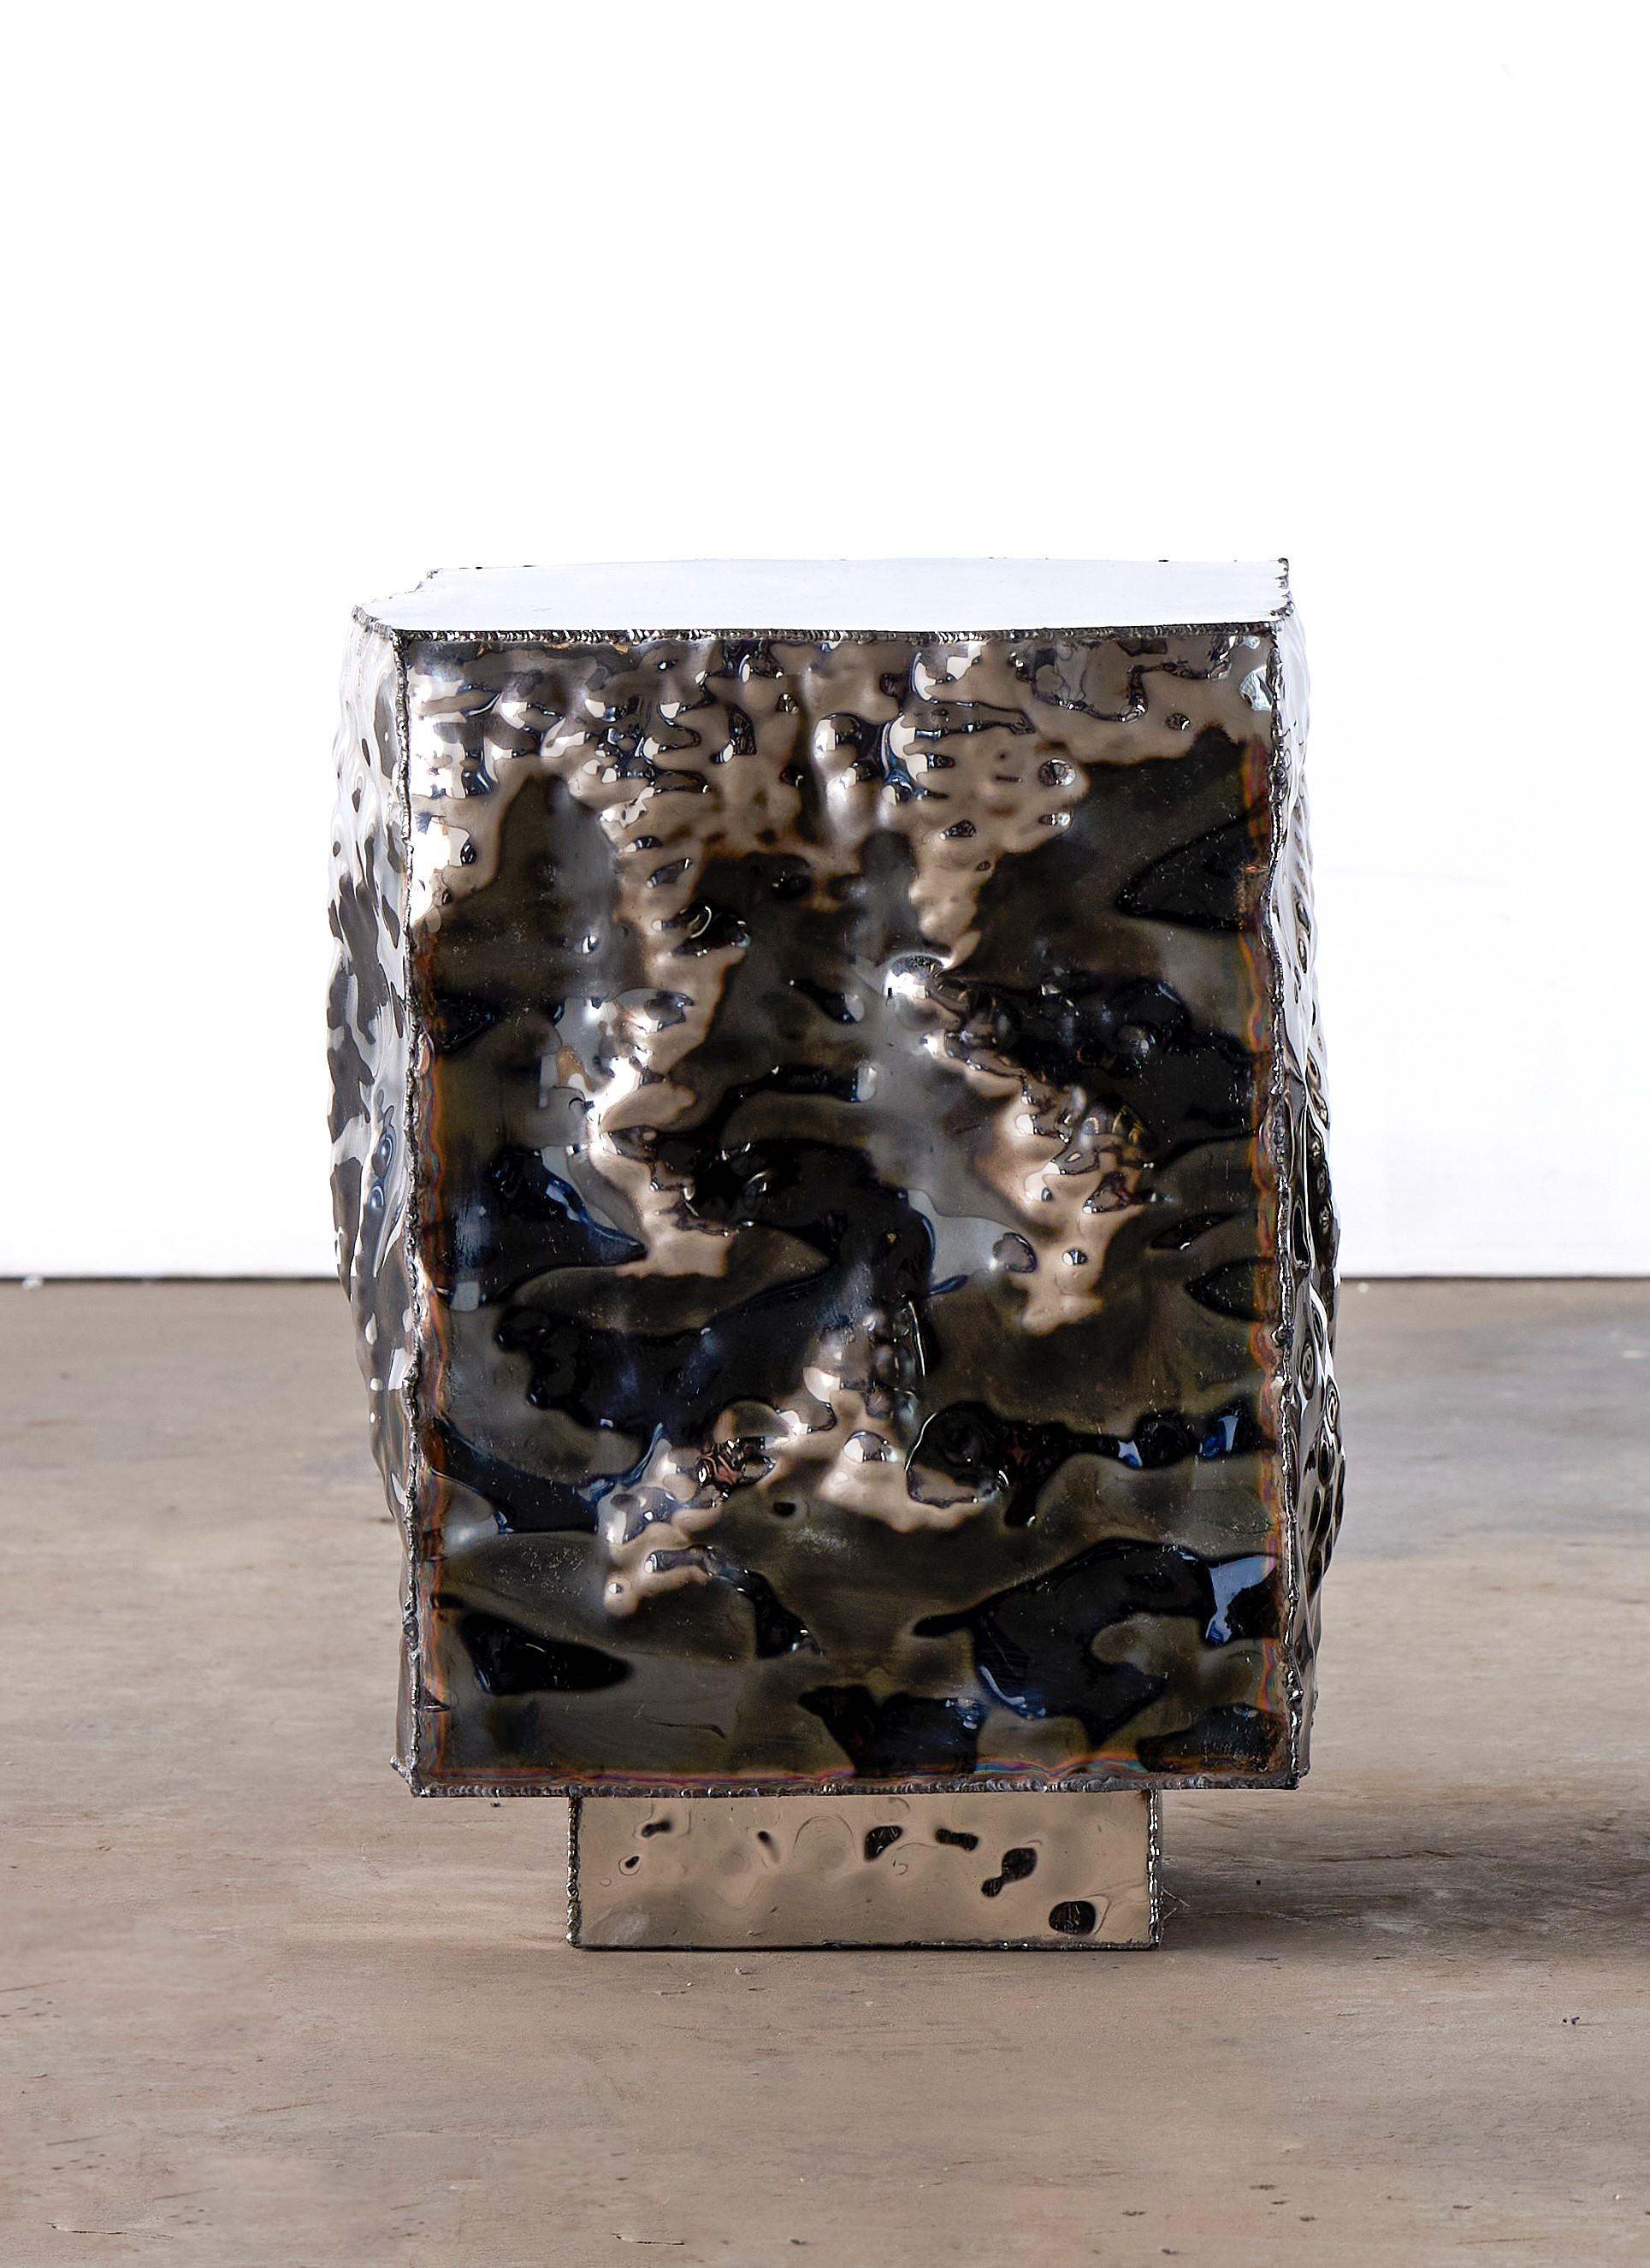 Crinkle side table I by Michael Gittings Studio
One of a kind
Dimensions: D 30 x W 30 x H 49 cm
Materials: Mirror-polished stainless steel

Michael Gittings
Melbourne-based designer Michael Gittings aims to Challenge pre-conceptions around